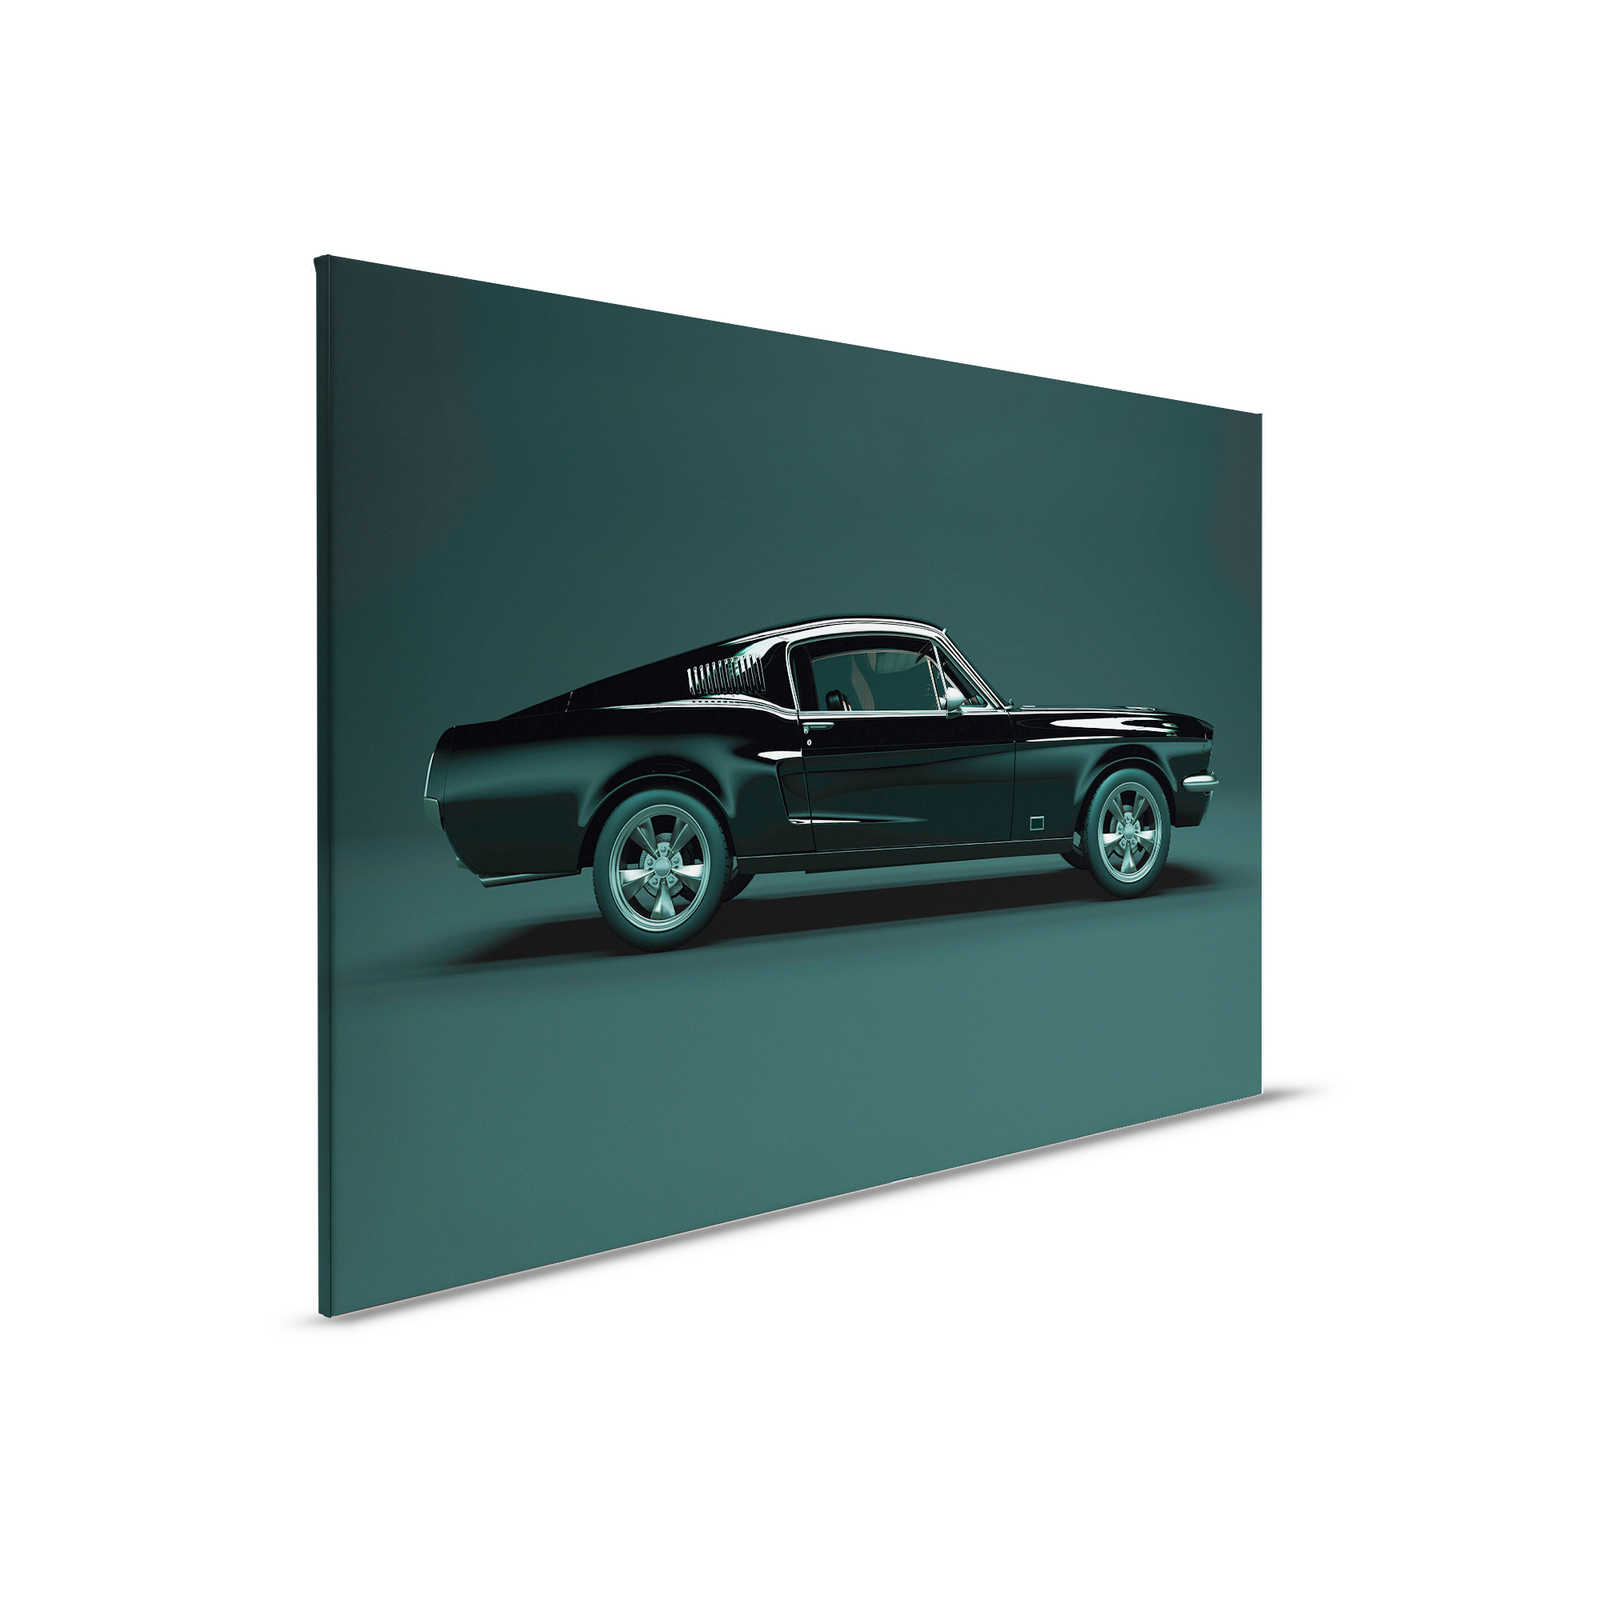         Mustang 1 - Canvas painting, side view Mustang, vintage - 0.90 m x 0.60 m
    